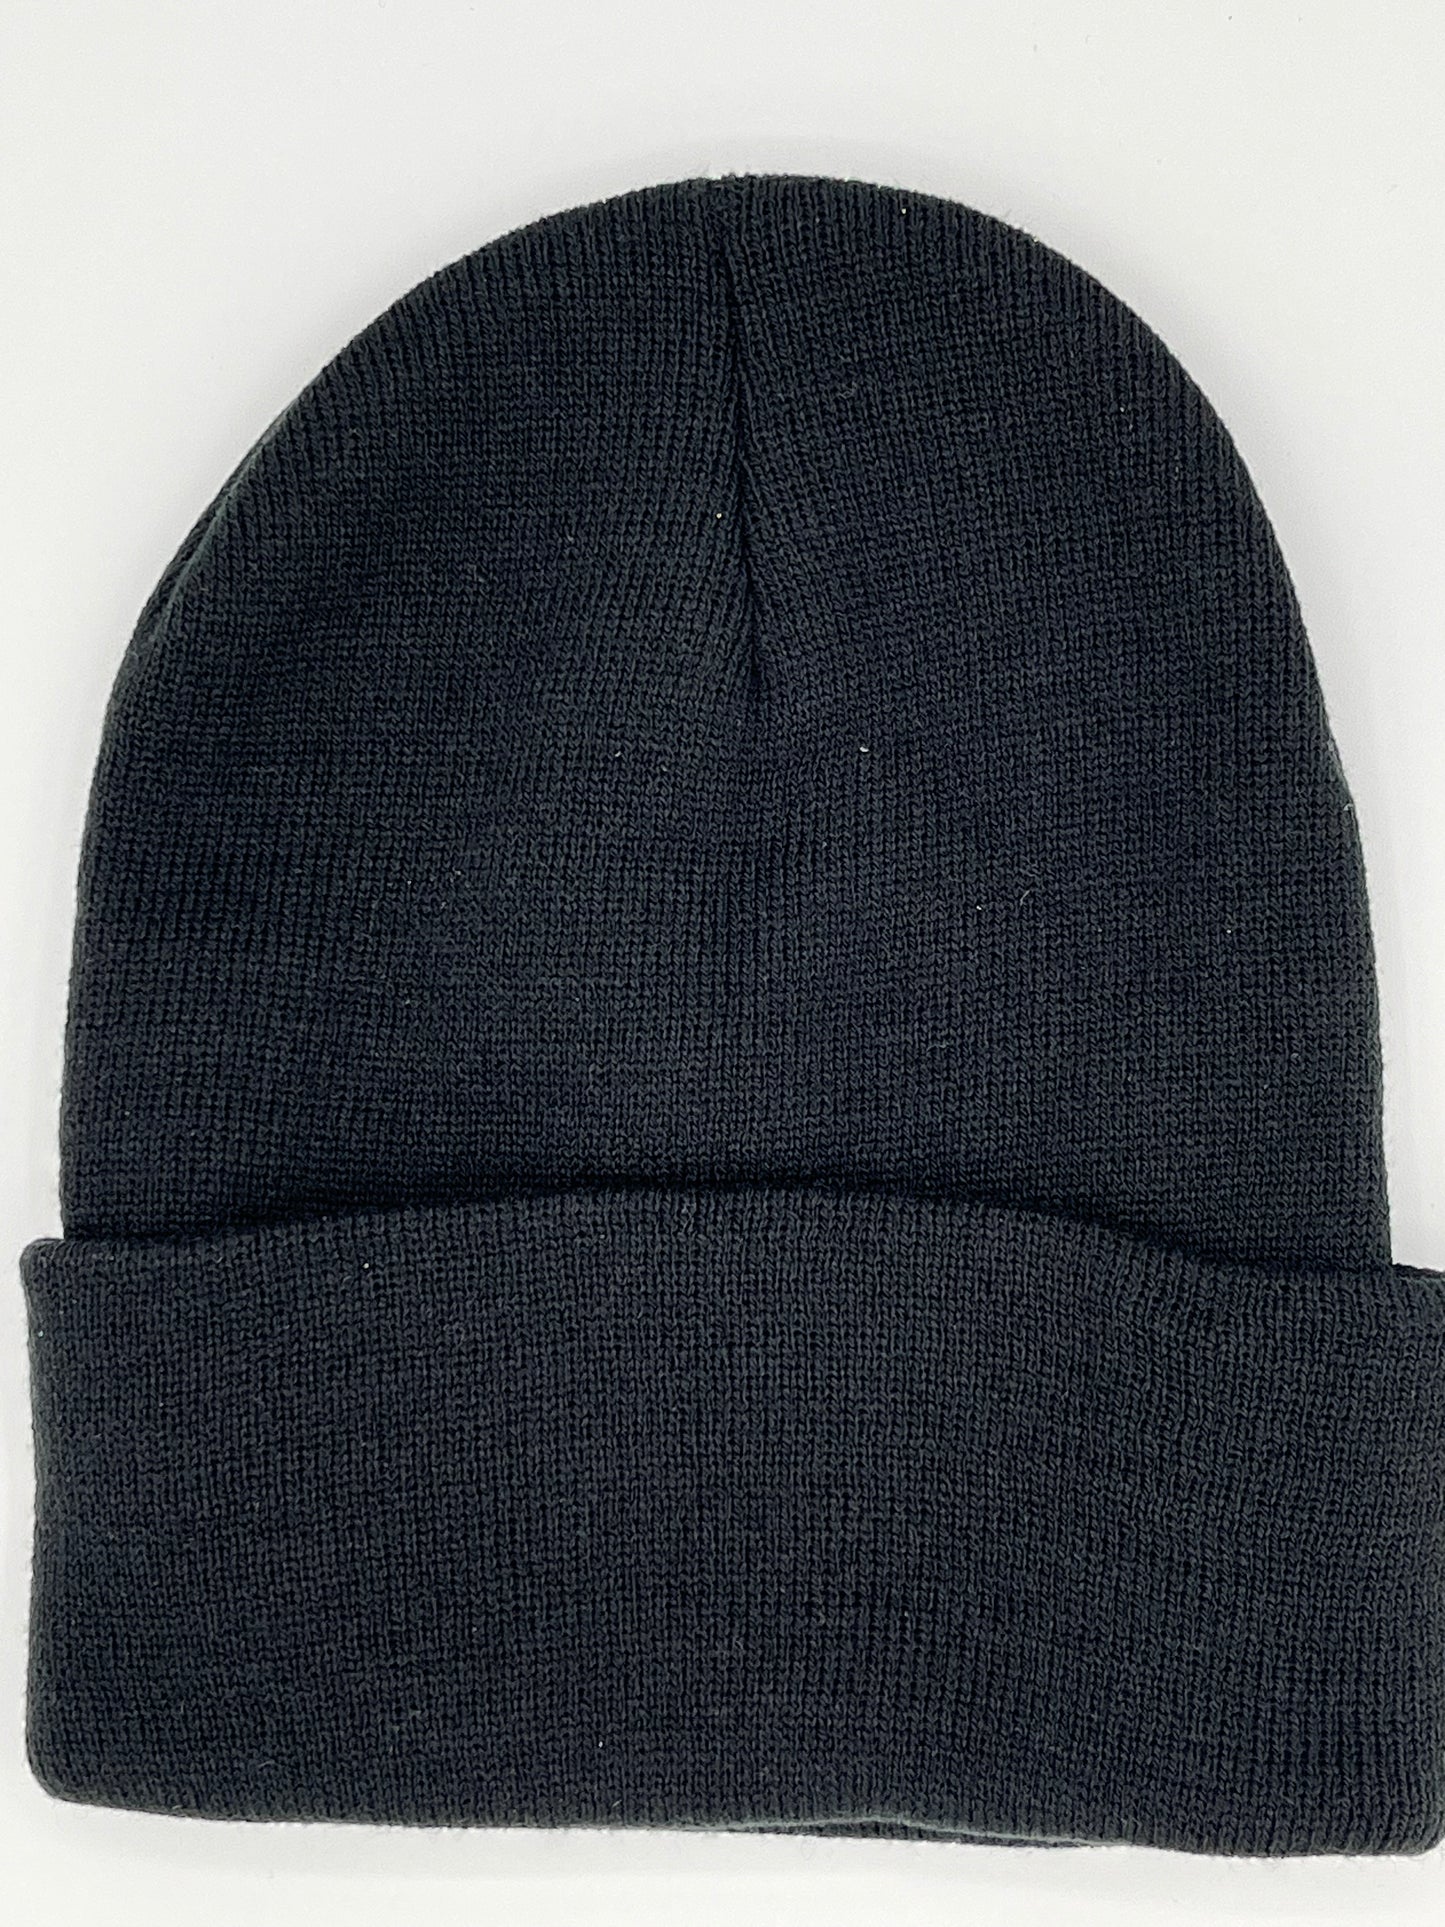 Blessed in black Solid Knit Beanie